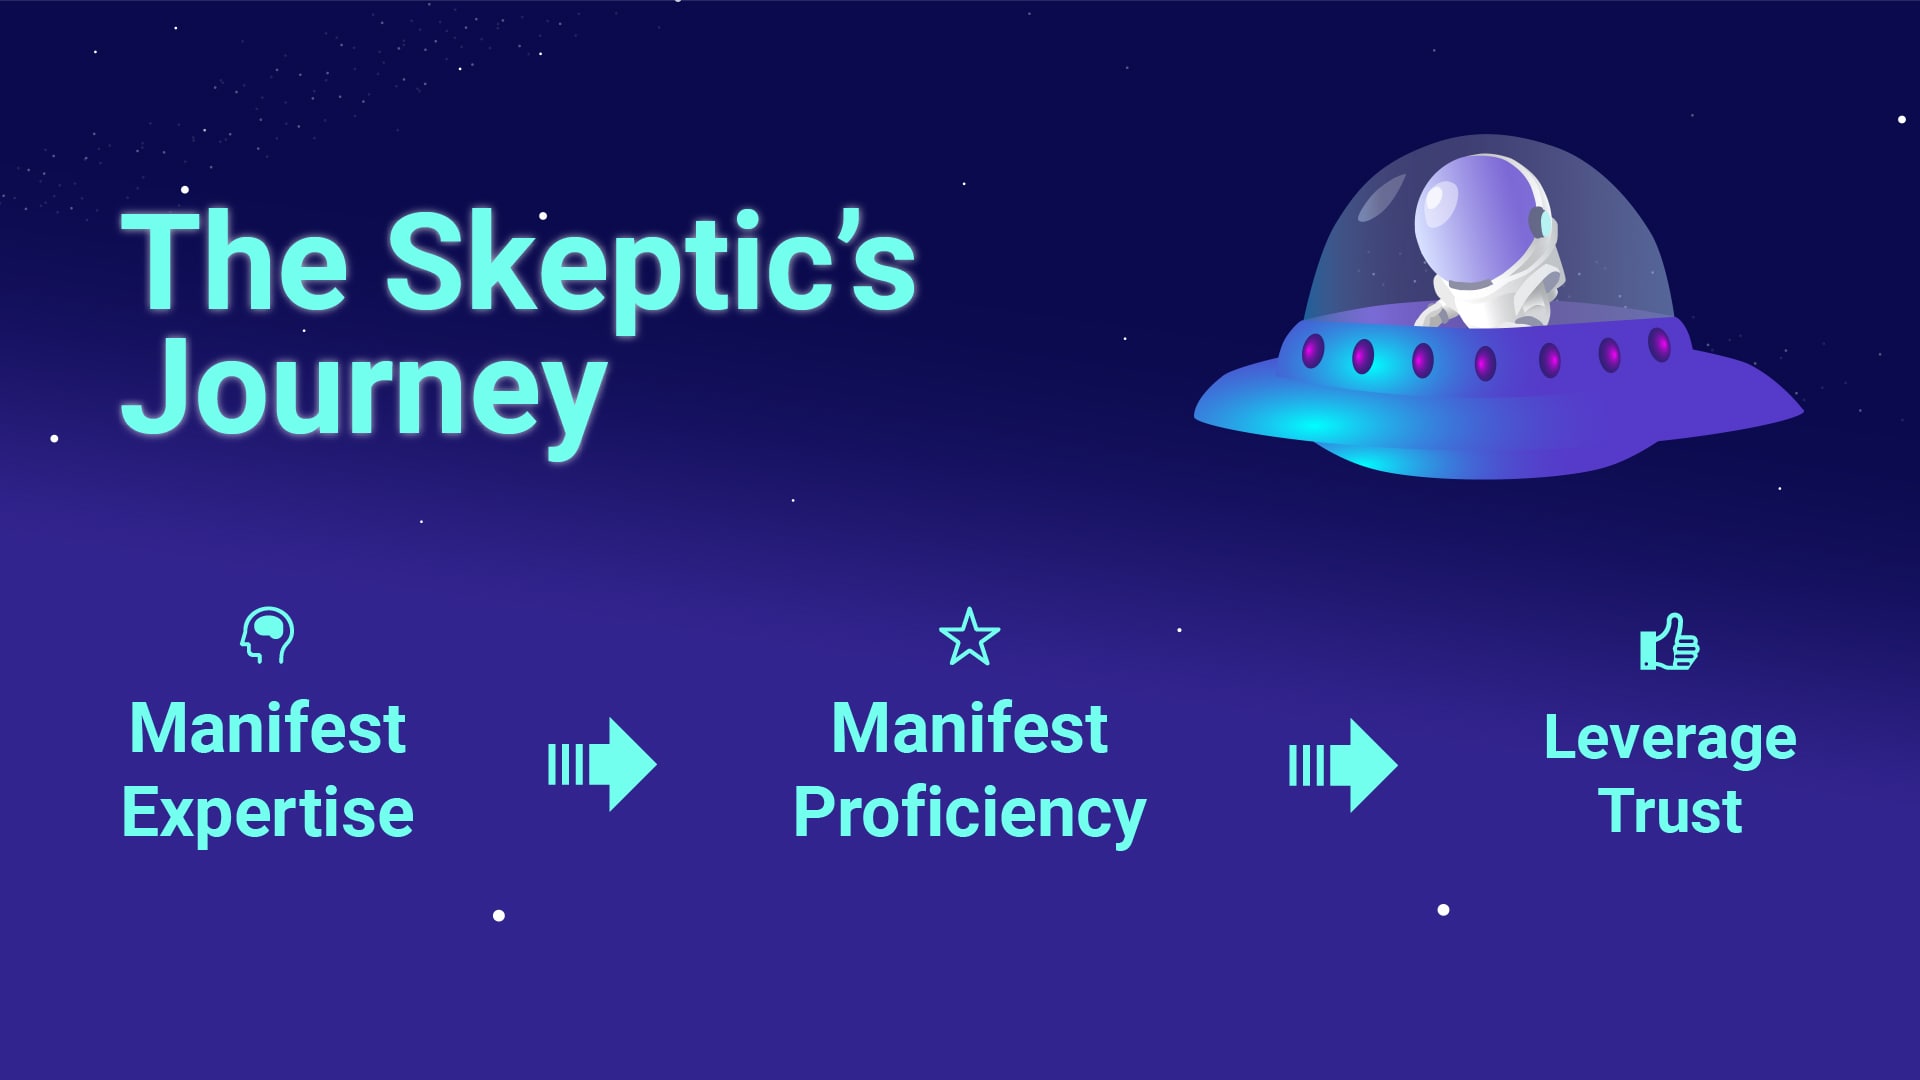 The Skeptic's Journey